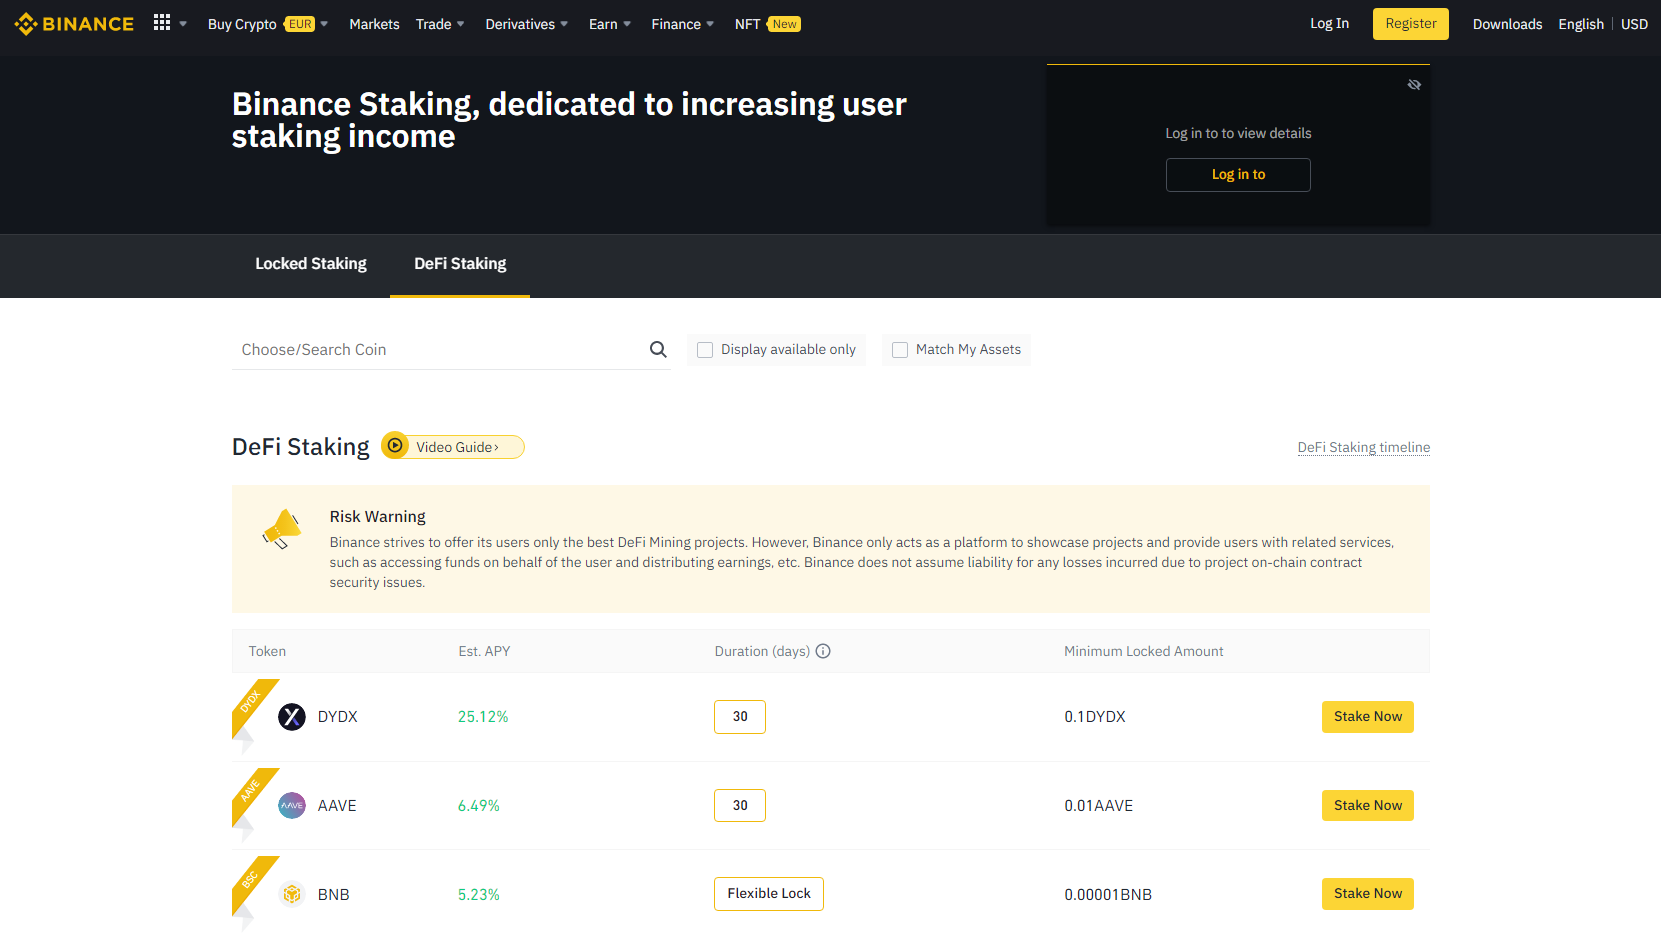 Binance platform also offers staking of all kinds of tokens, including their own BNB token.